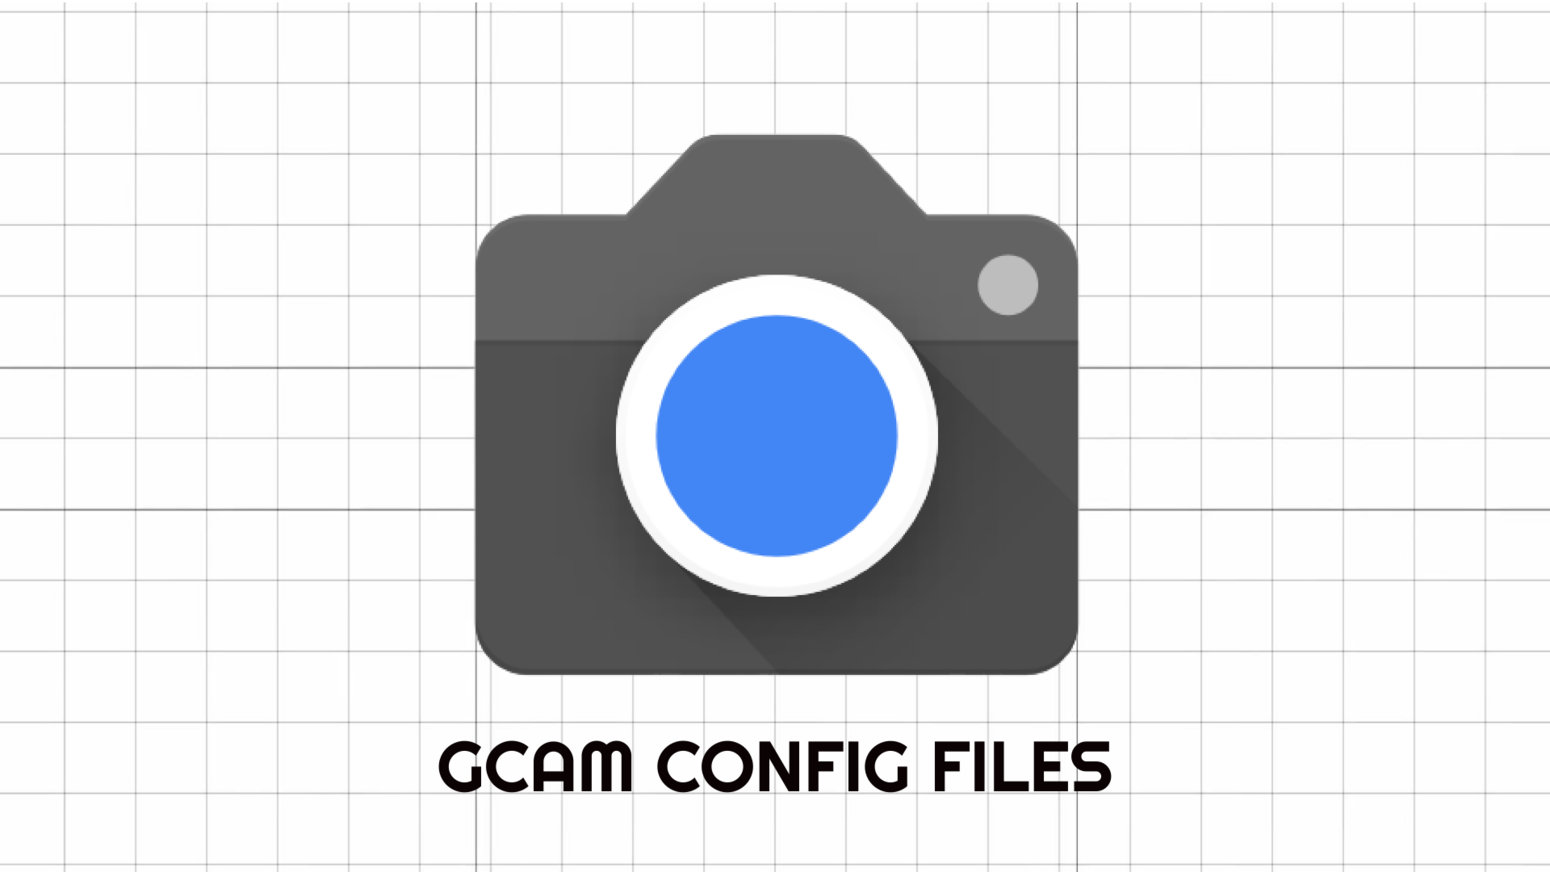 Best GCAM CONFIG FILES DOWNLOAD